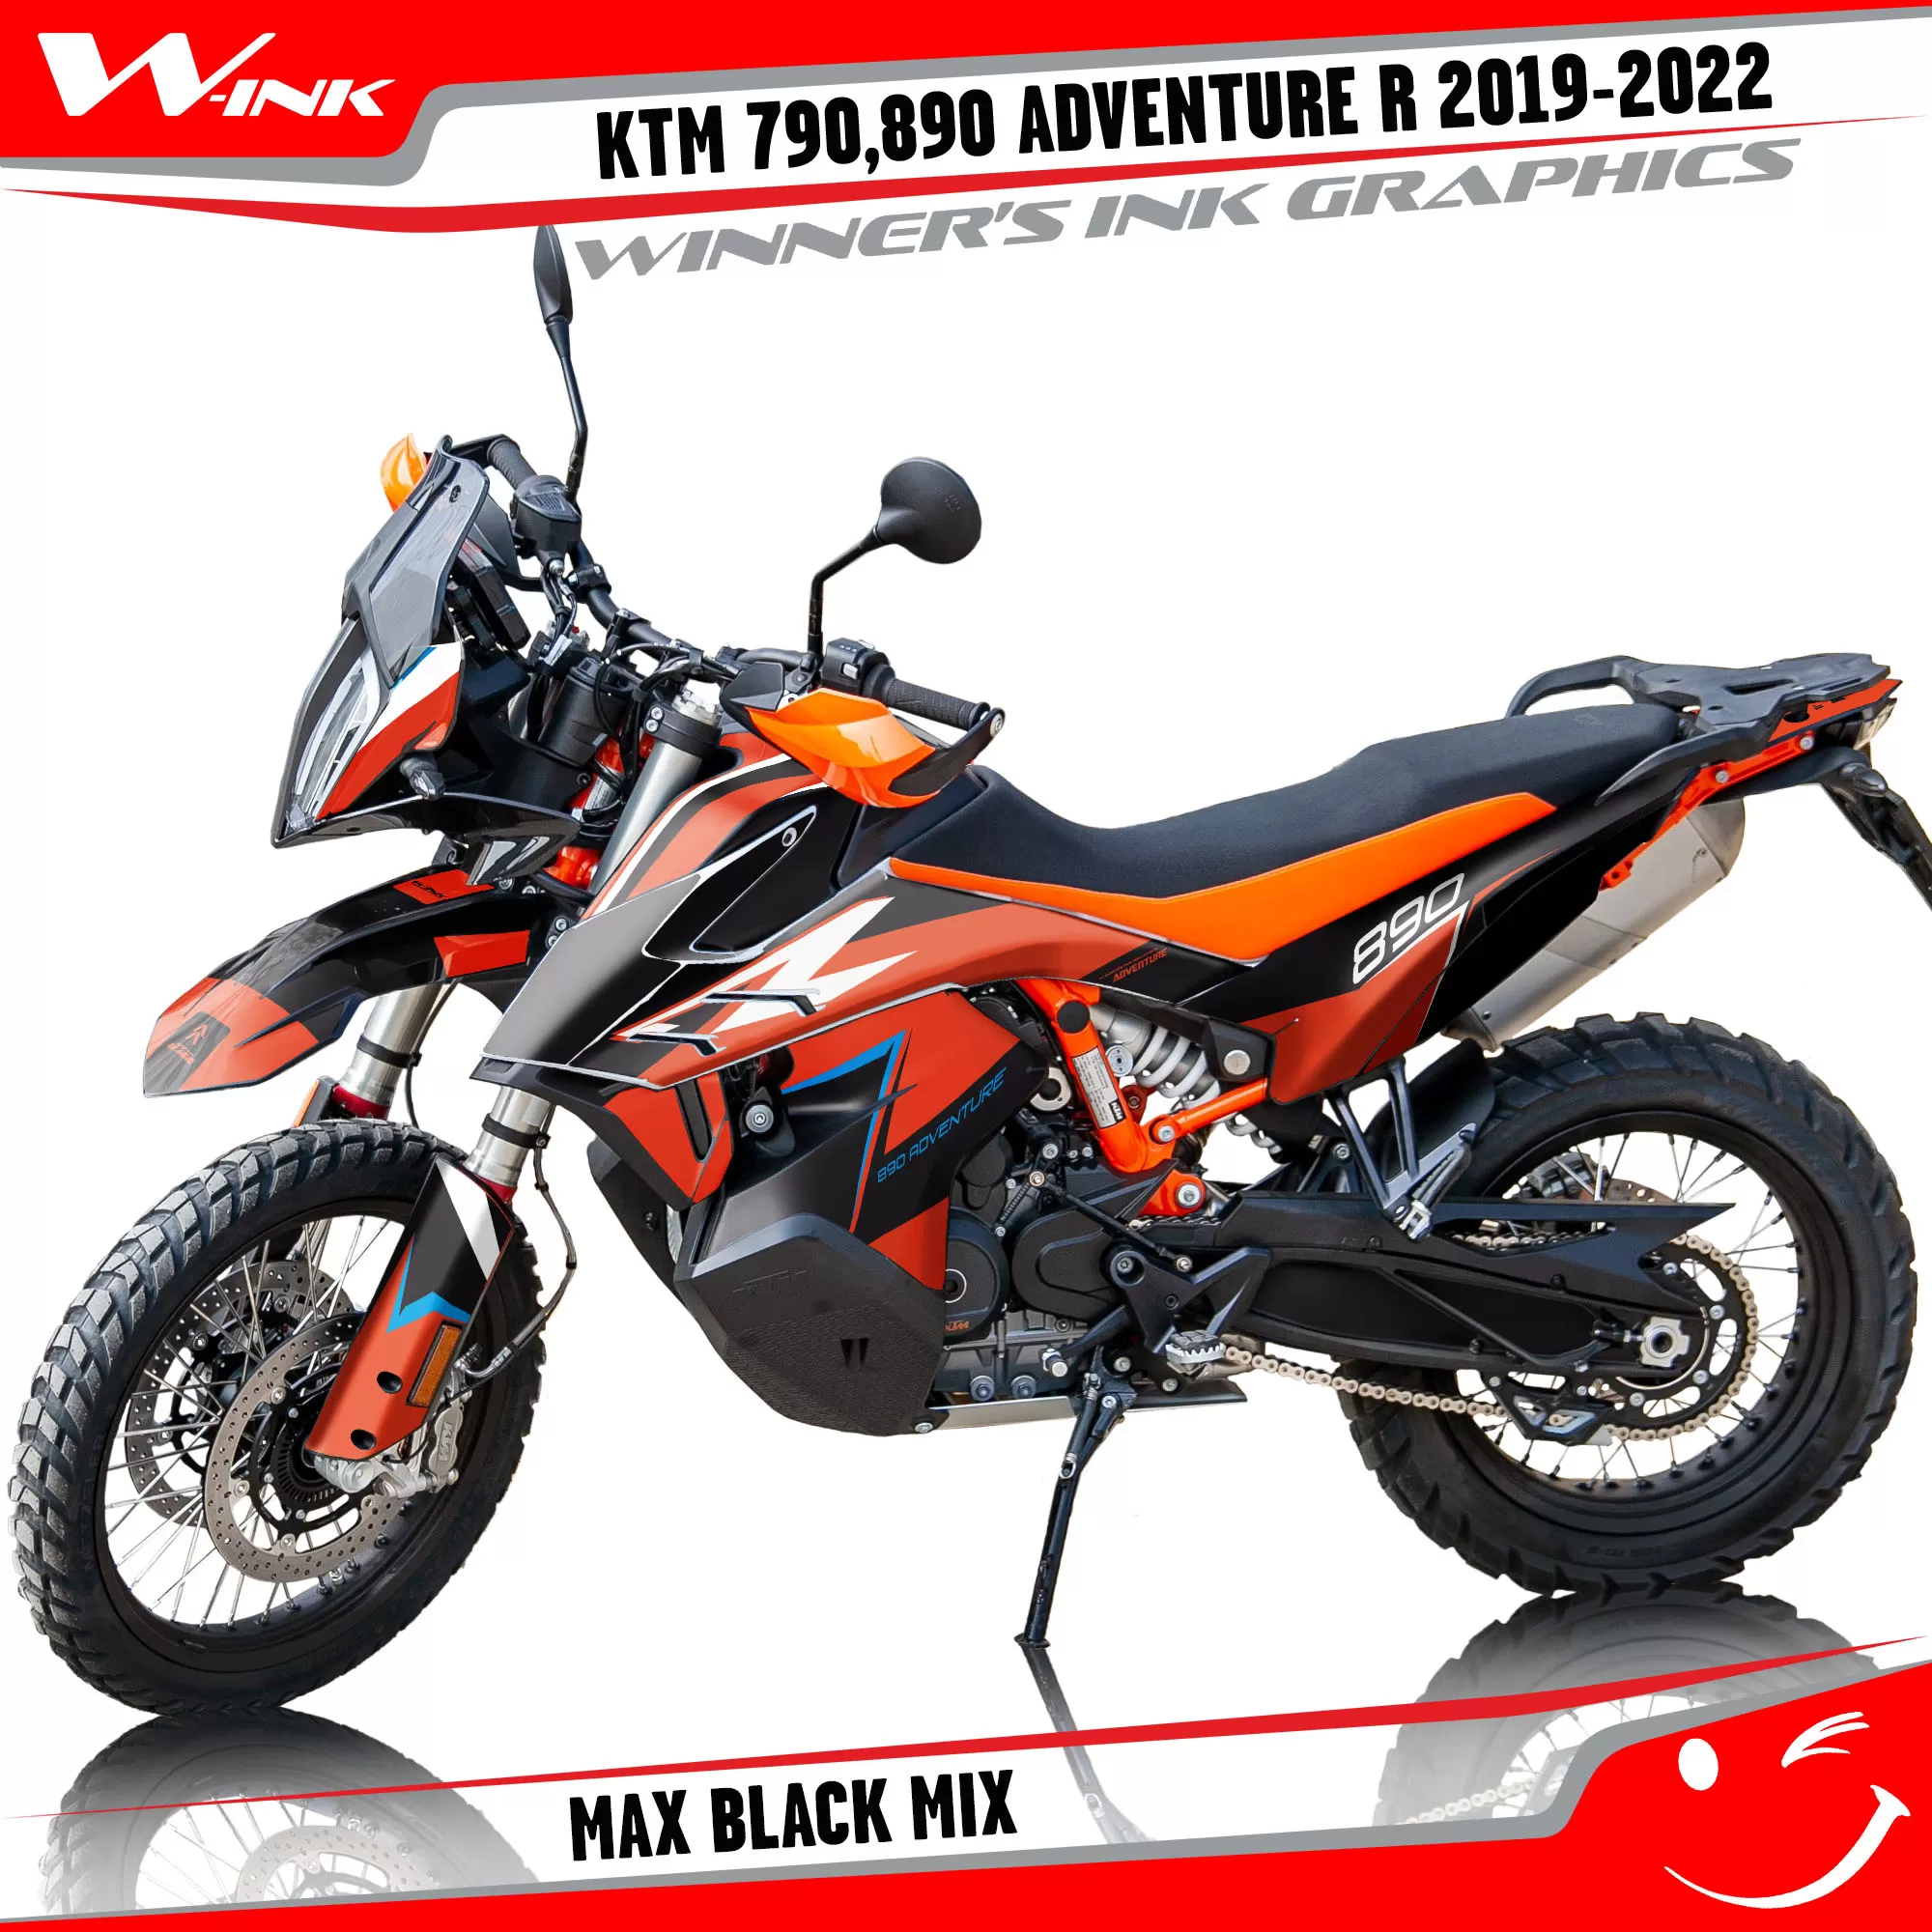 Adventure-R-790-890-2019-2020-2021-2022-graphics-kit-and-decals-with-designs-Max-Black-Mix